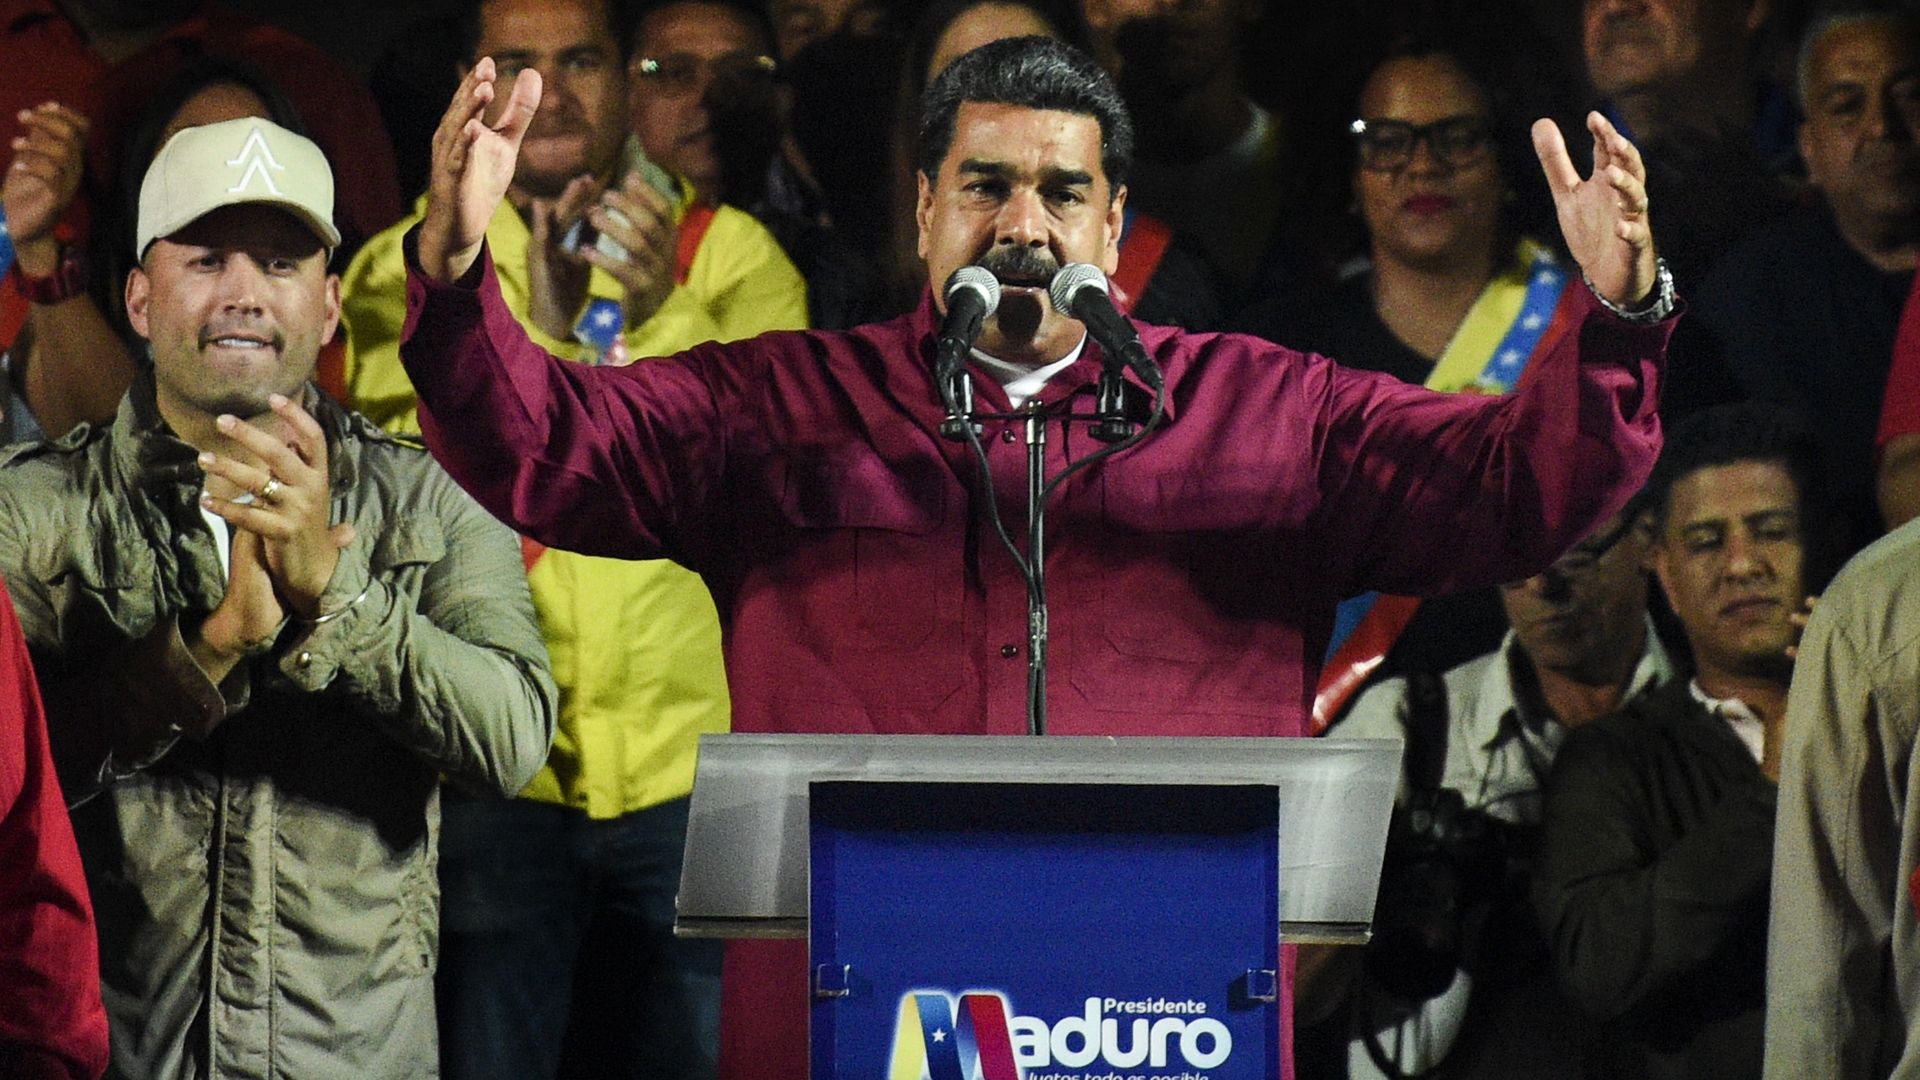 Venezuela's President, Nicolas Maduro, talks to his followers after announcing his reelection 